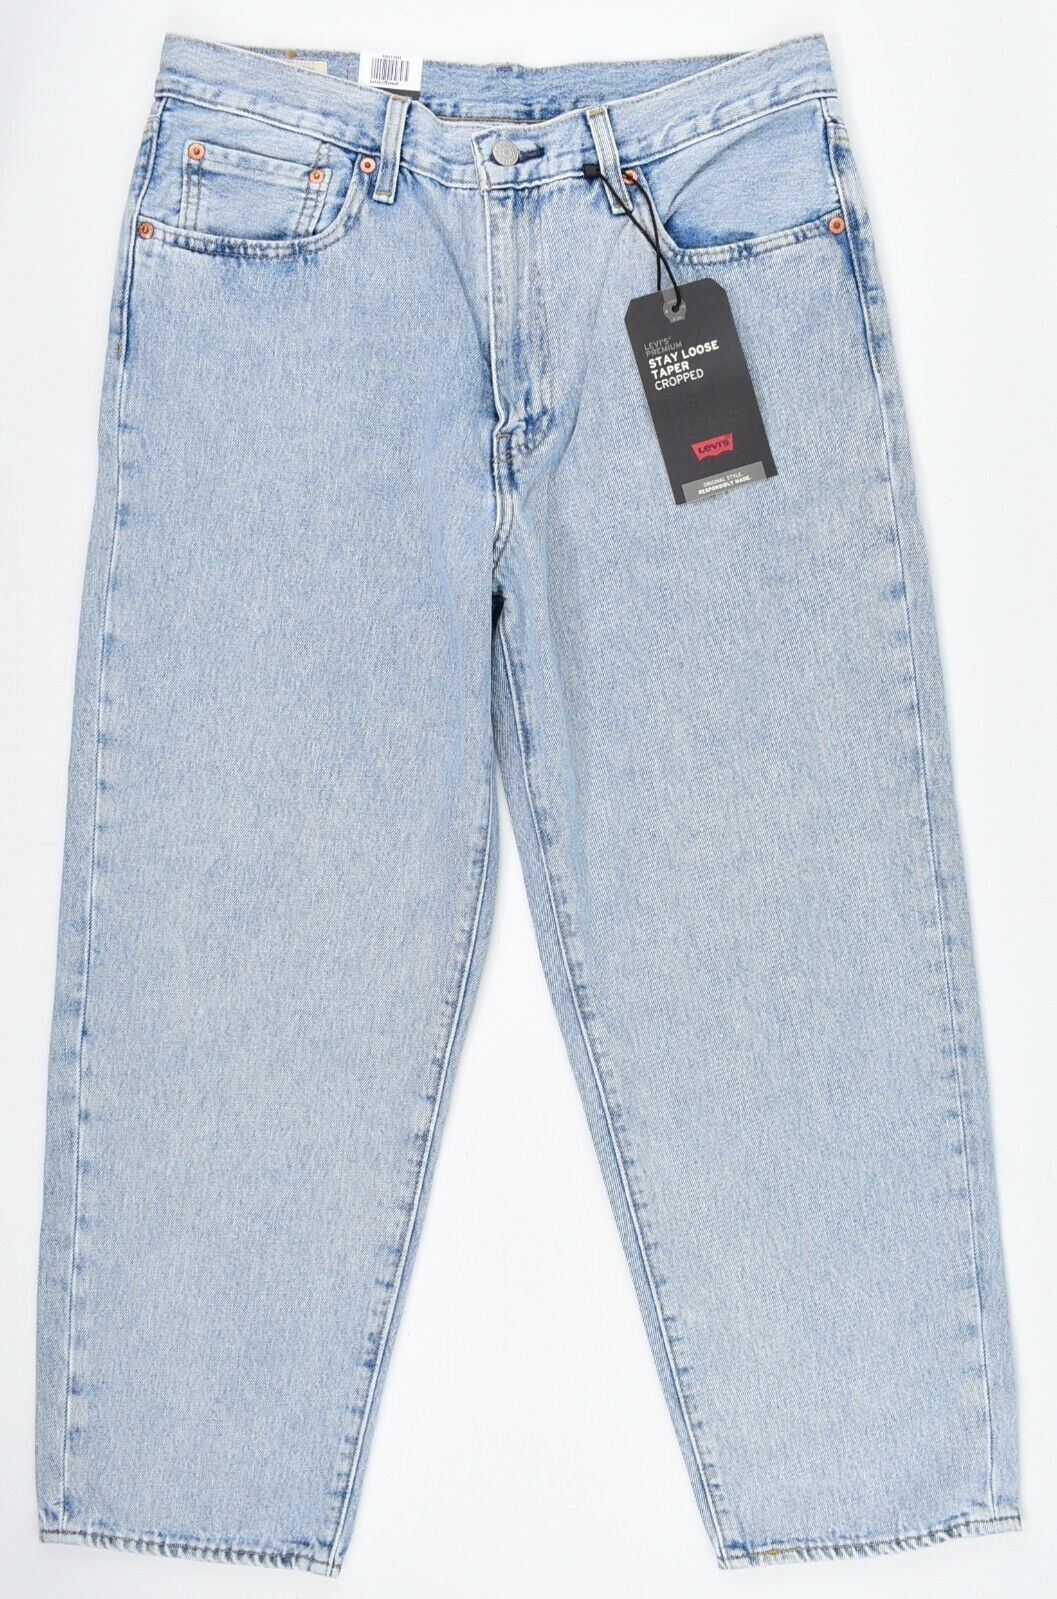 LEVI'S Women's STAY LOOSE TAPER Cropped Baggy Jeans, Royal Stonewash, size W32